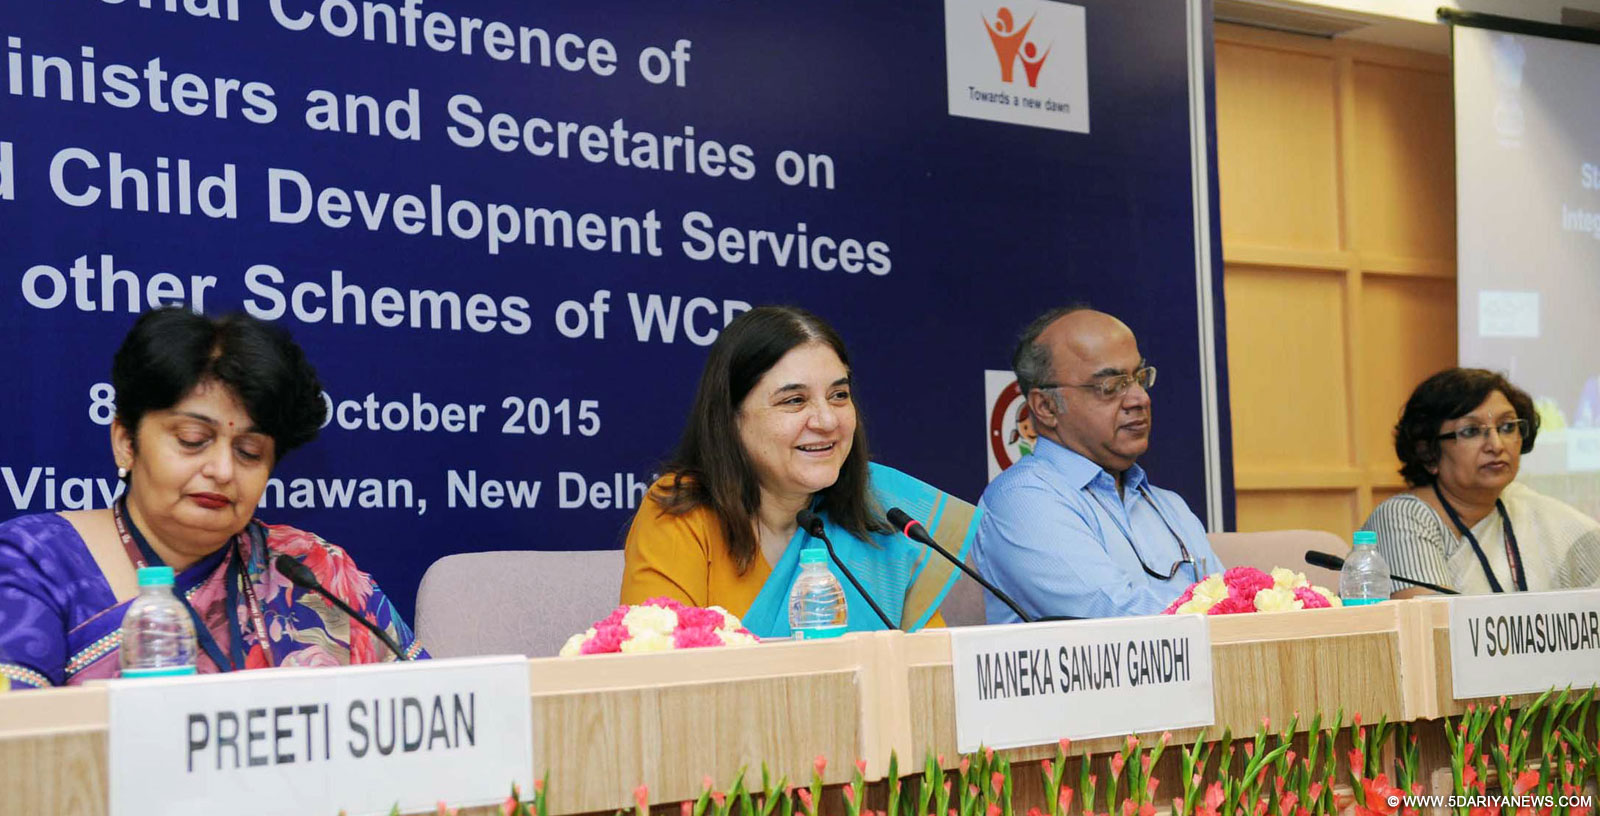 Maneka Sanjay Gandhi addressing at the inauguration of the National Conference of the State Ministers and Principal Secretaries/Secretaries of WCD to review the implementation of various schemes of Ministry, in New Delhi on October 08, 2015. 